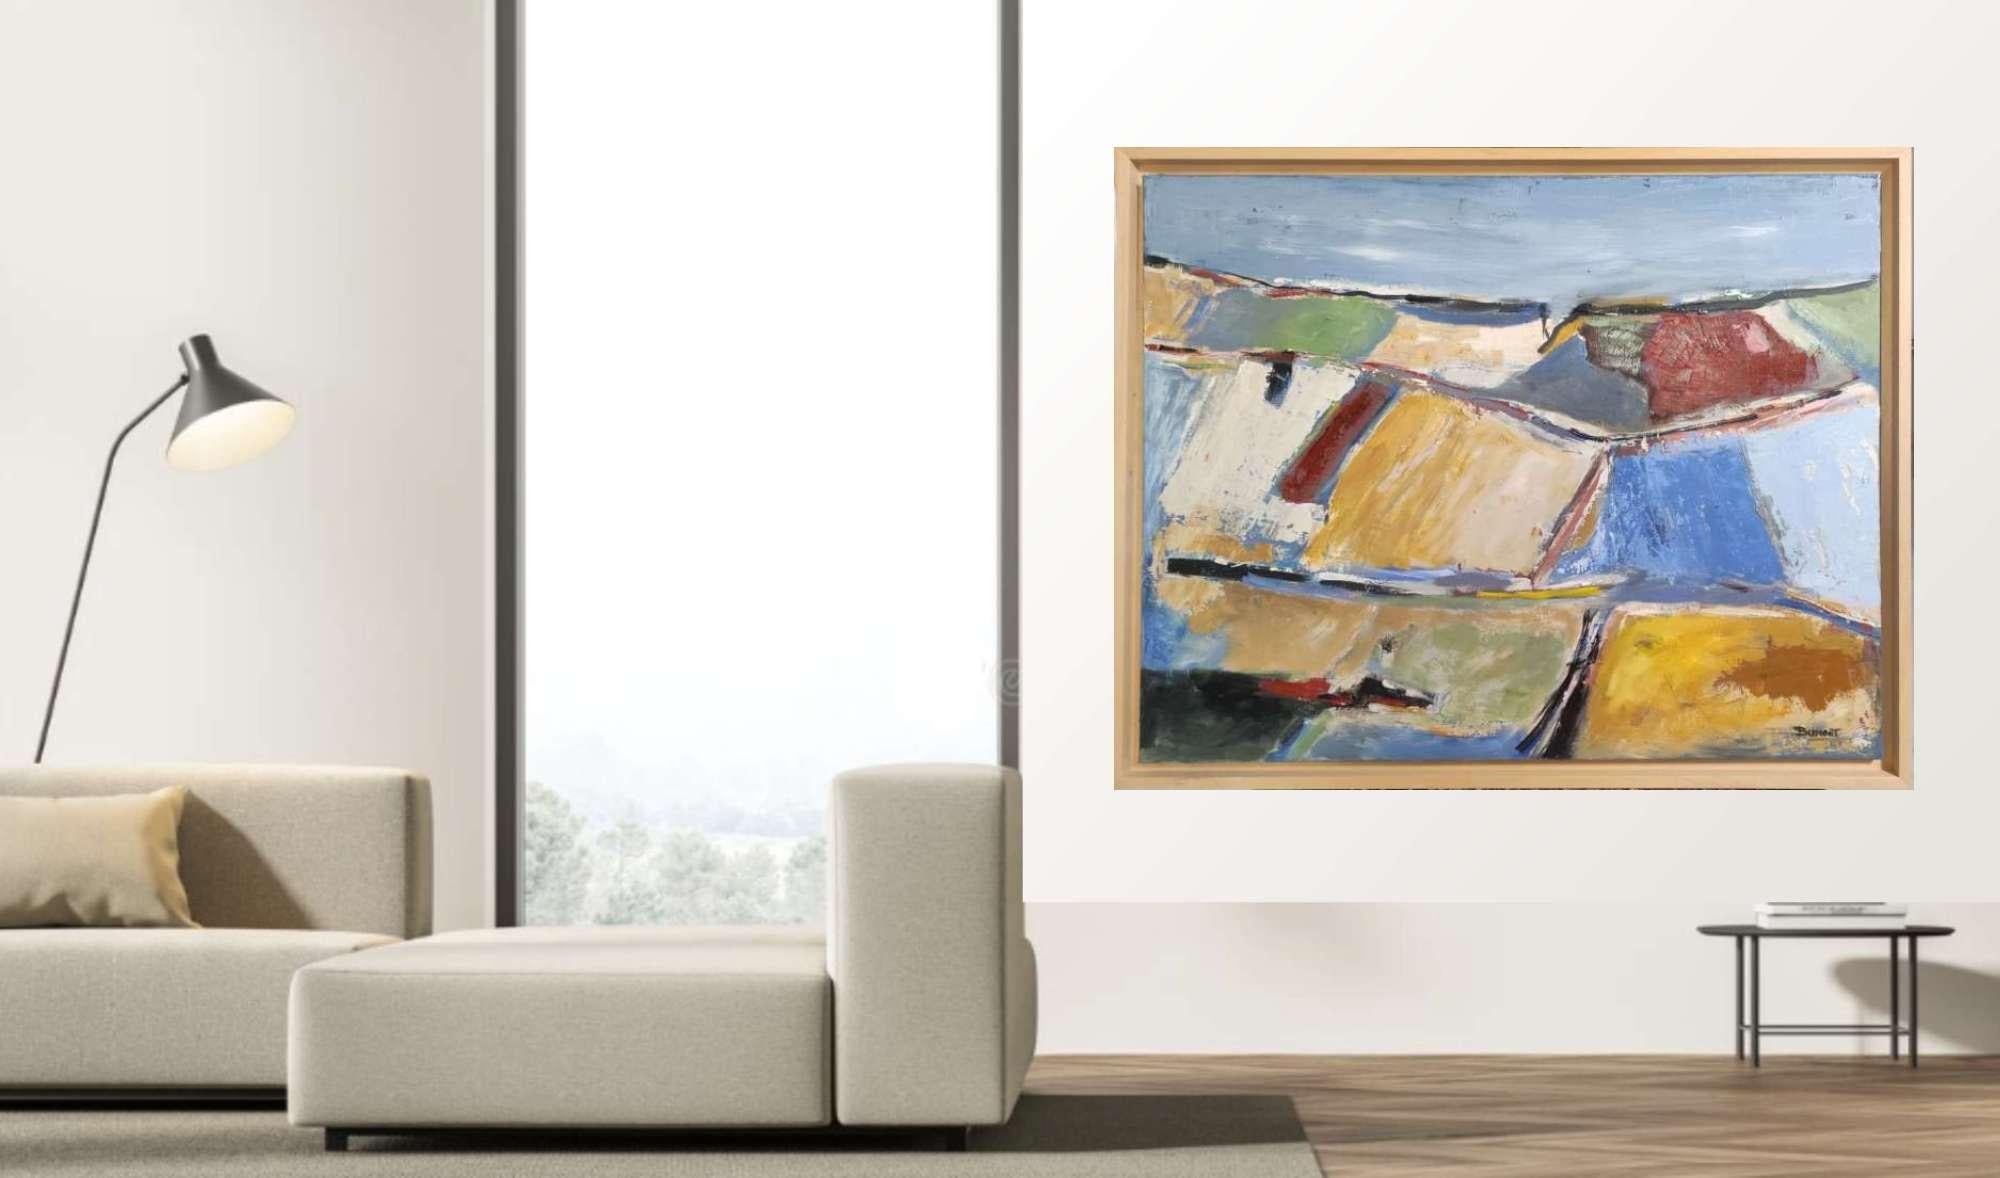 fields 8, countryside landscape, blue, yellow, abstract, expressionism, oil - Gray Landscape Painting by SOPHIE DUMONT